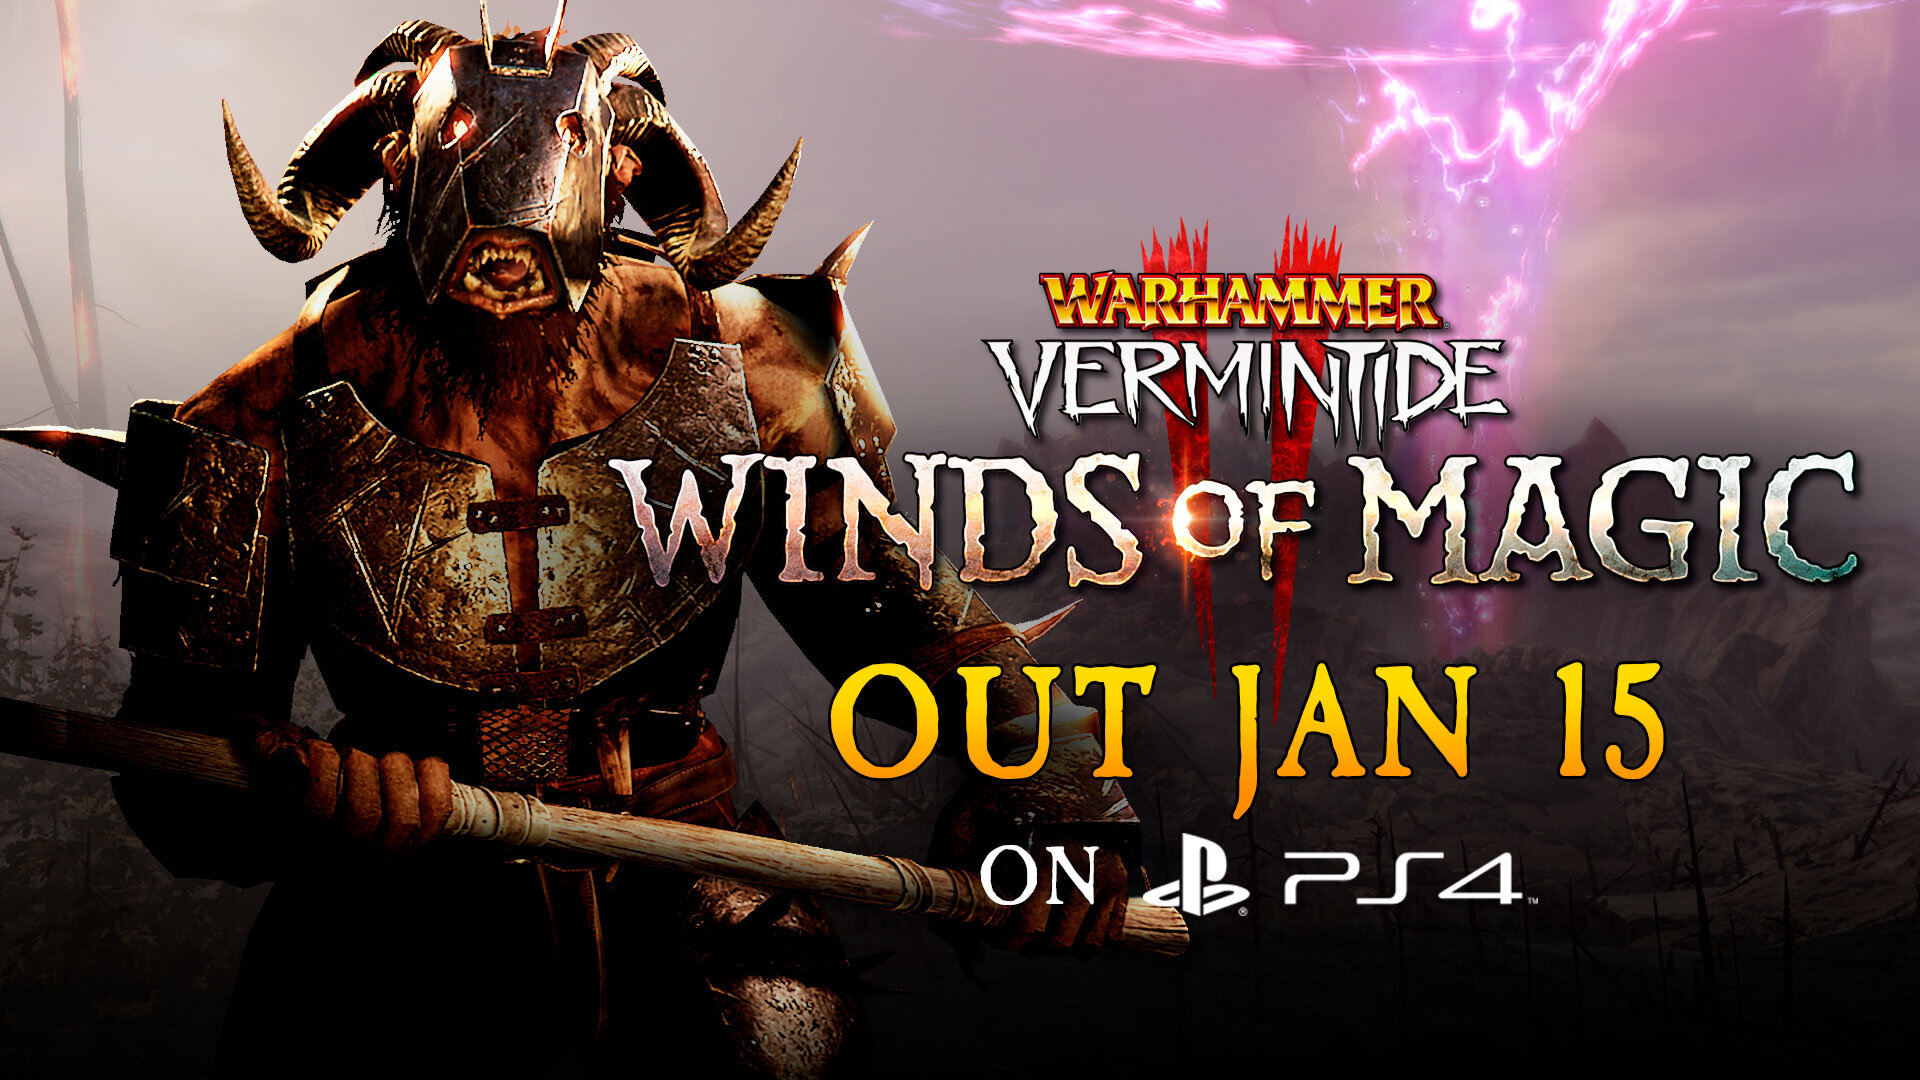 Winds of Magic is coming to PS4 on January 15 — Warhammer: Vermintide 2